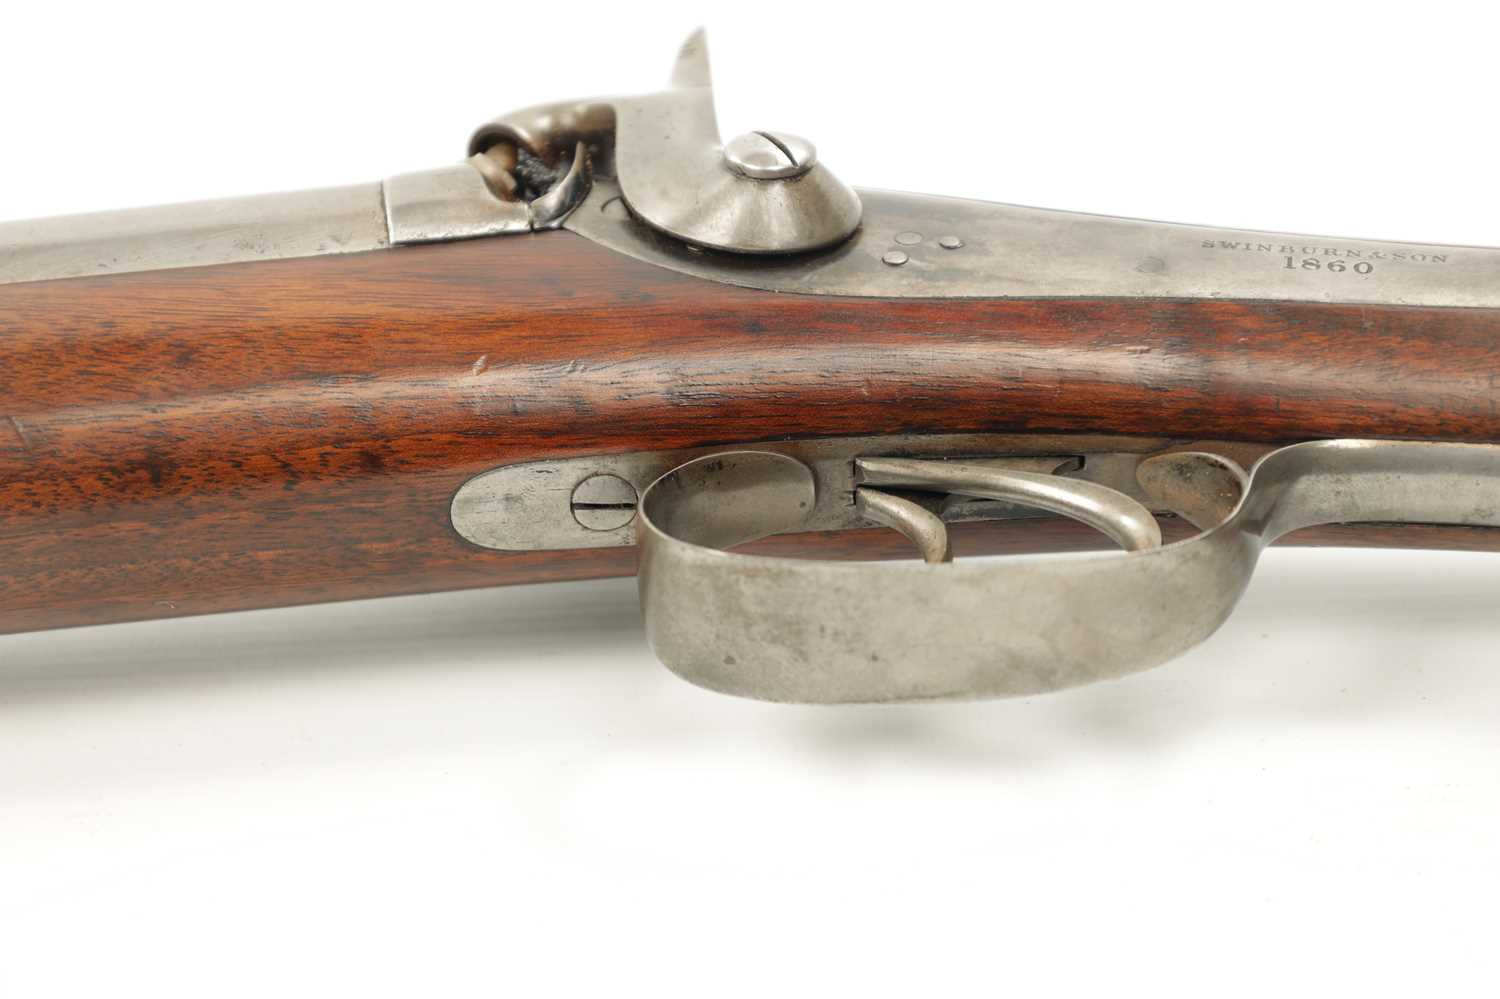 A RARE 19TH CENTURY SWINBURN & SON JACOBS PERCUSSION RIFLE WITH BAYONET - Image 11 of 17